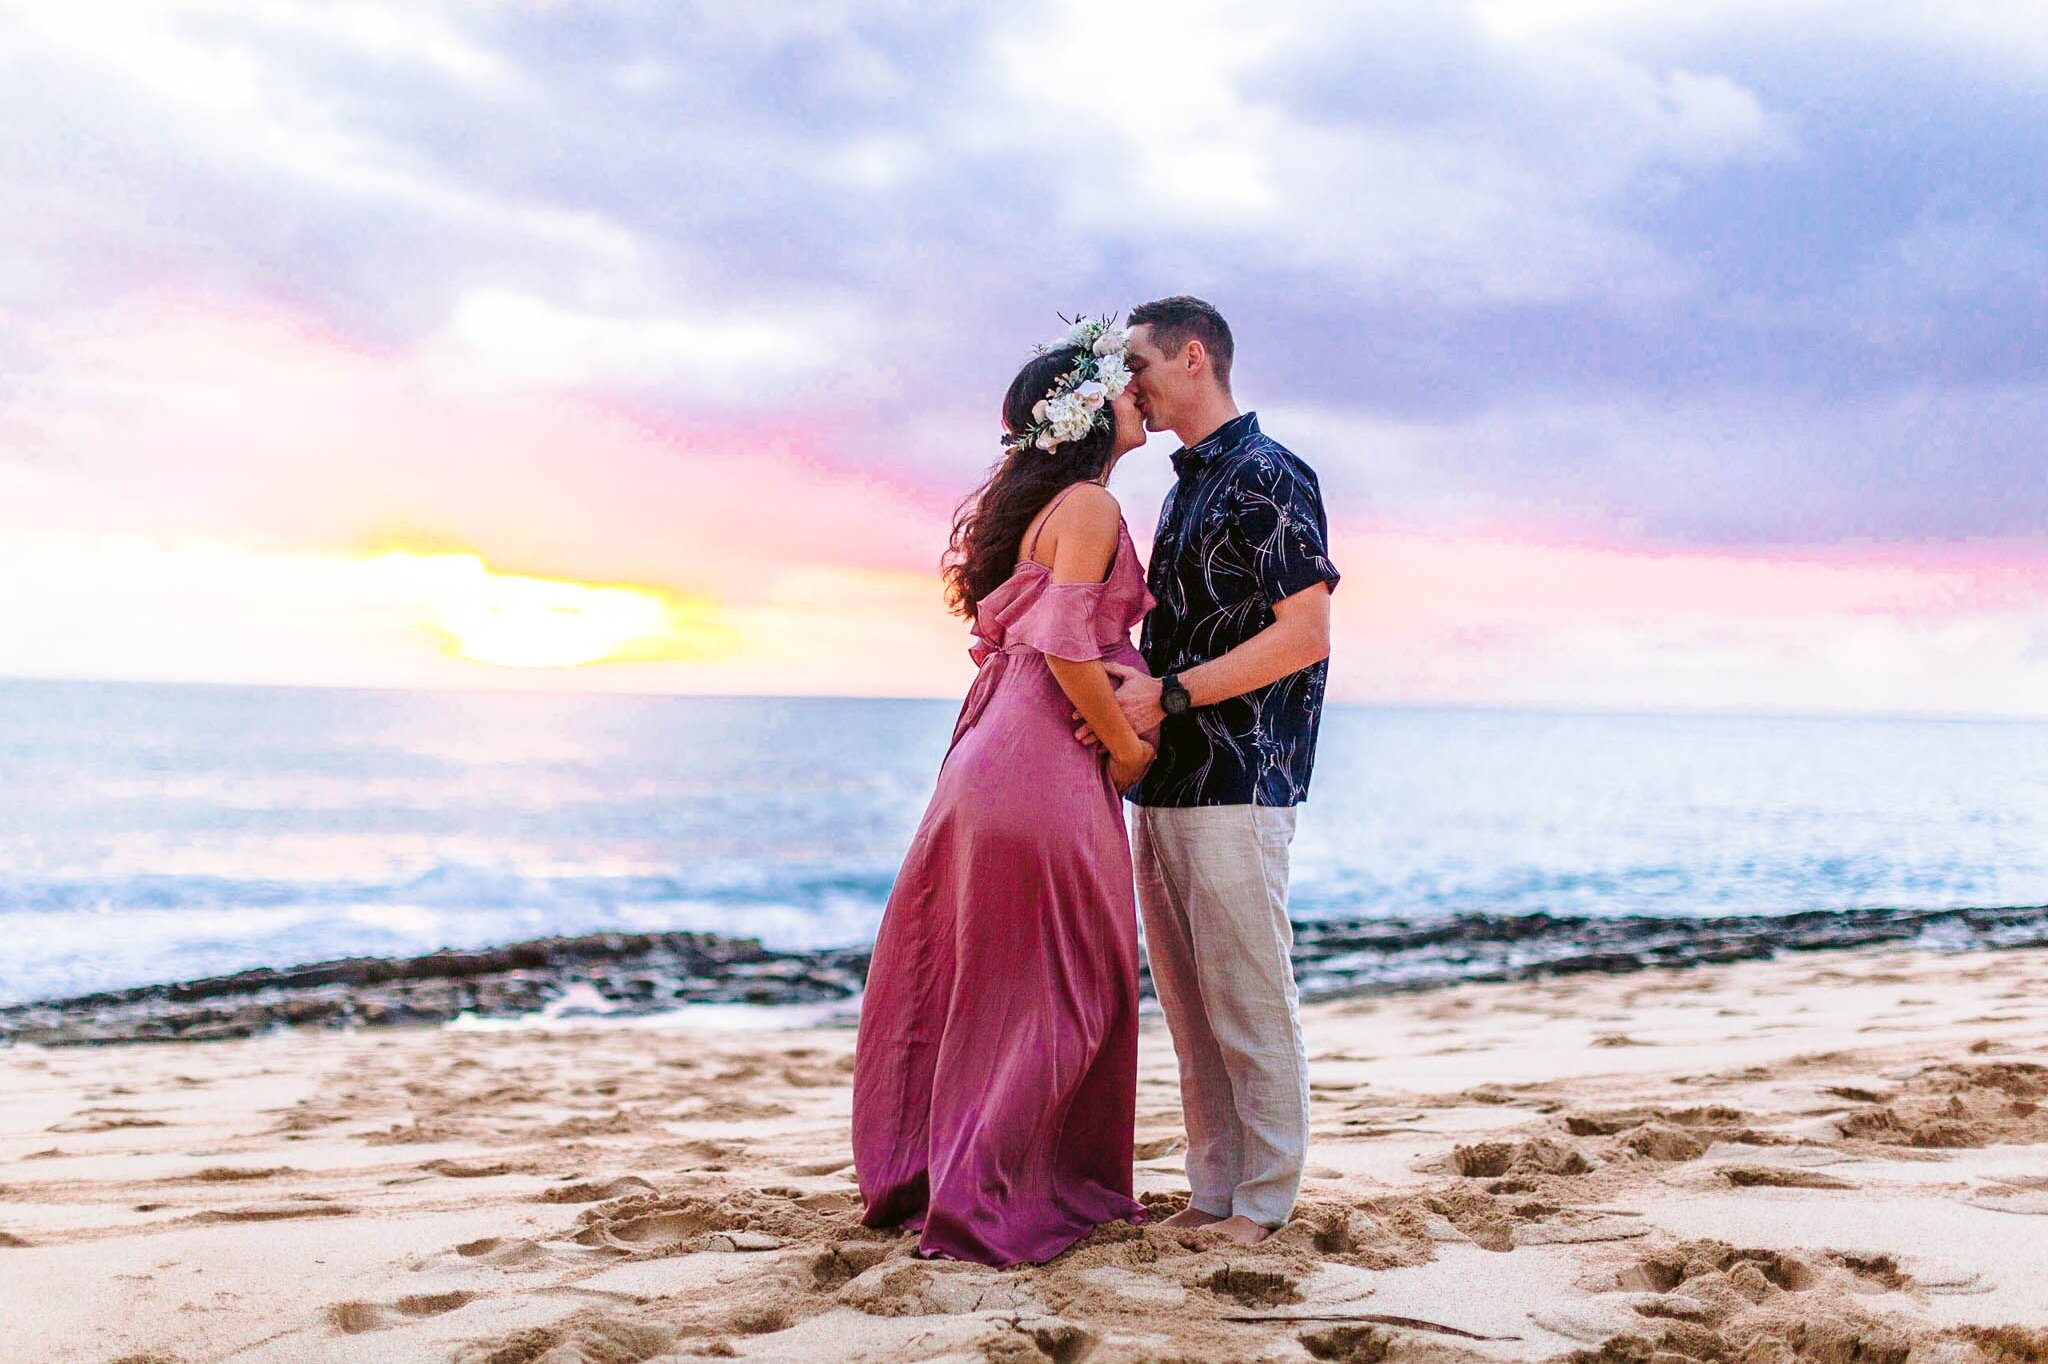 Ruth - Maternity Photography Session at Maili Beach Park, West side oahu - hawaii family photographer 21.jpg